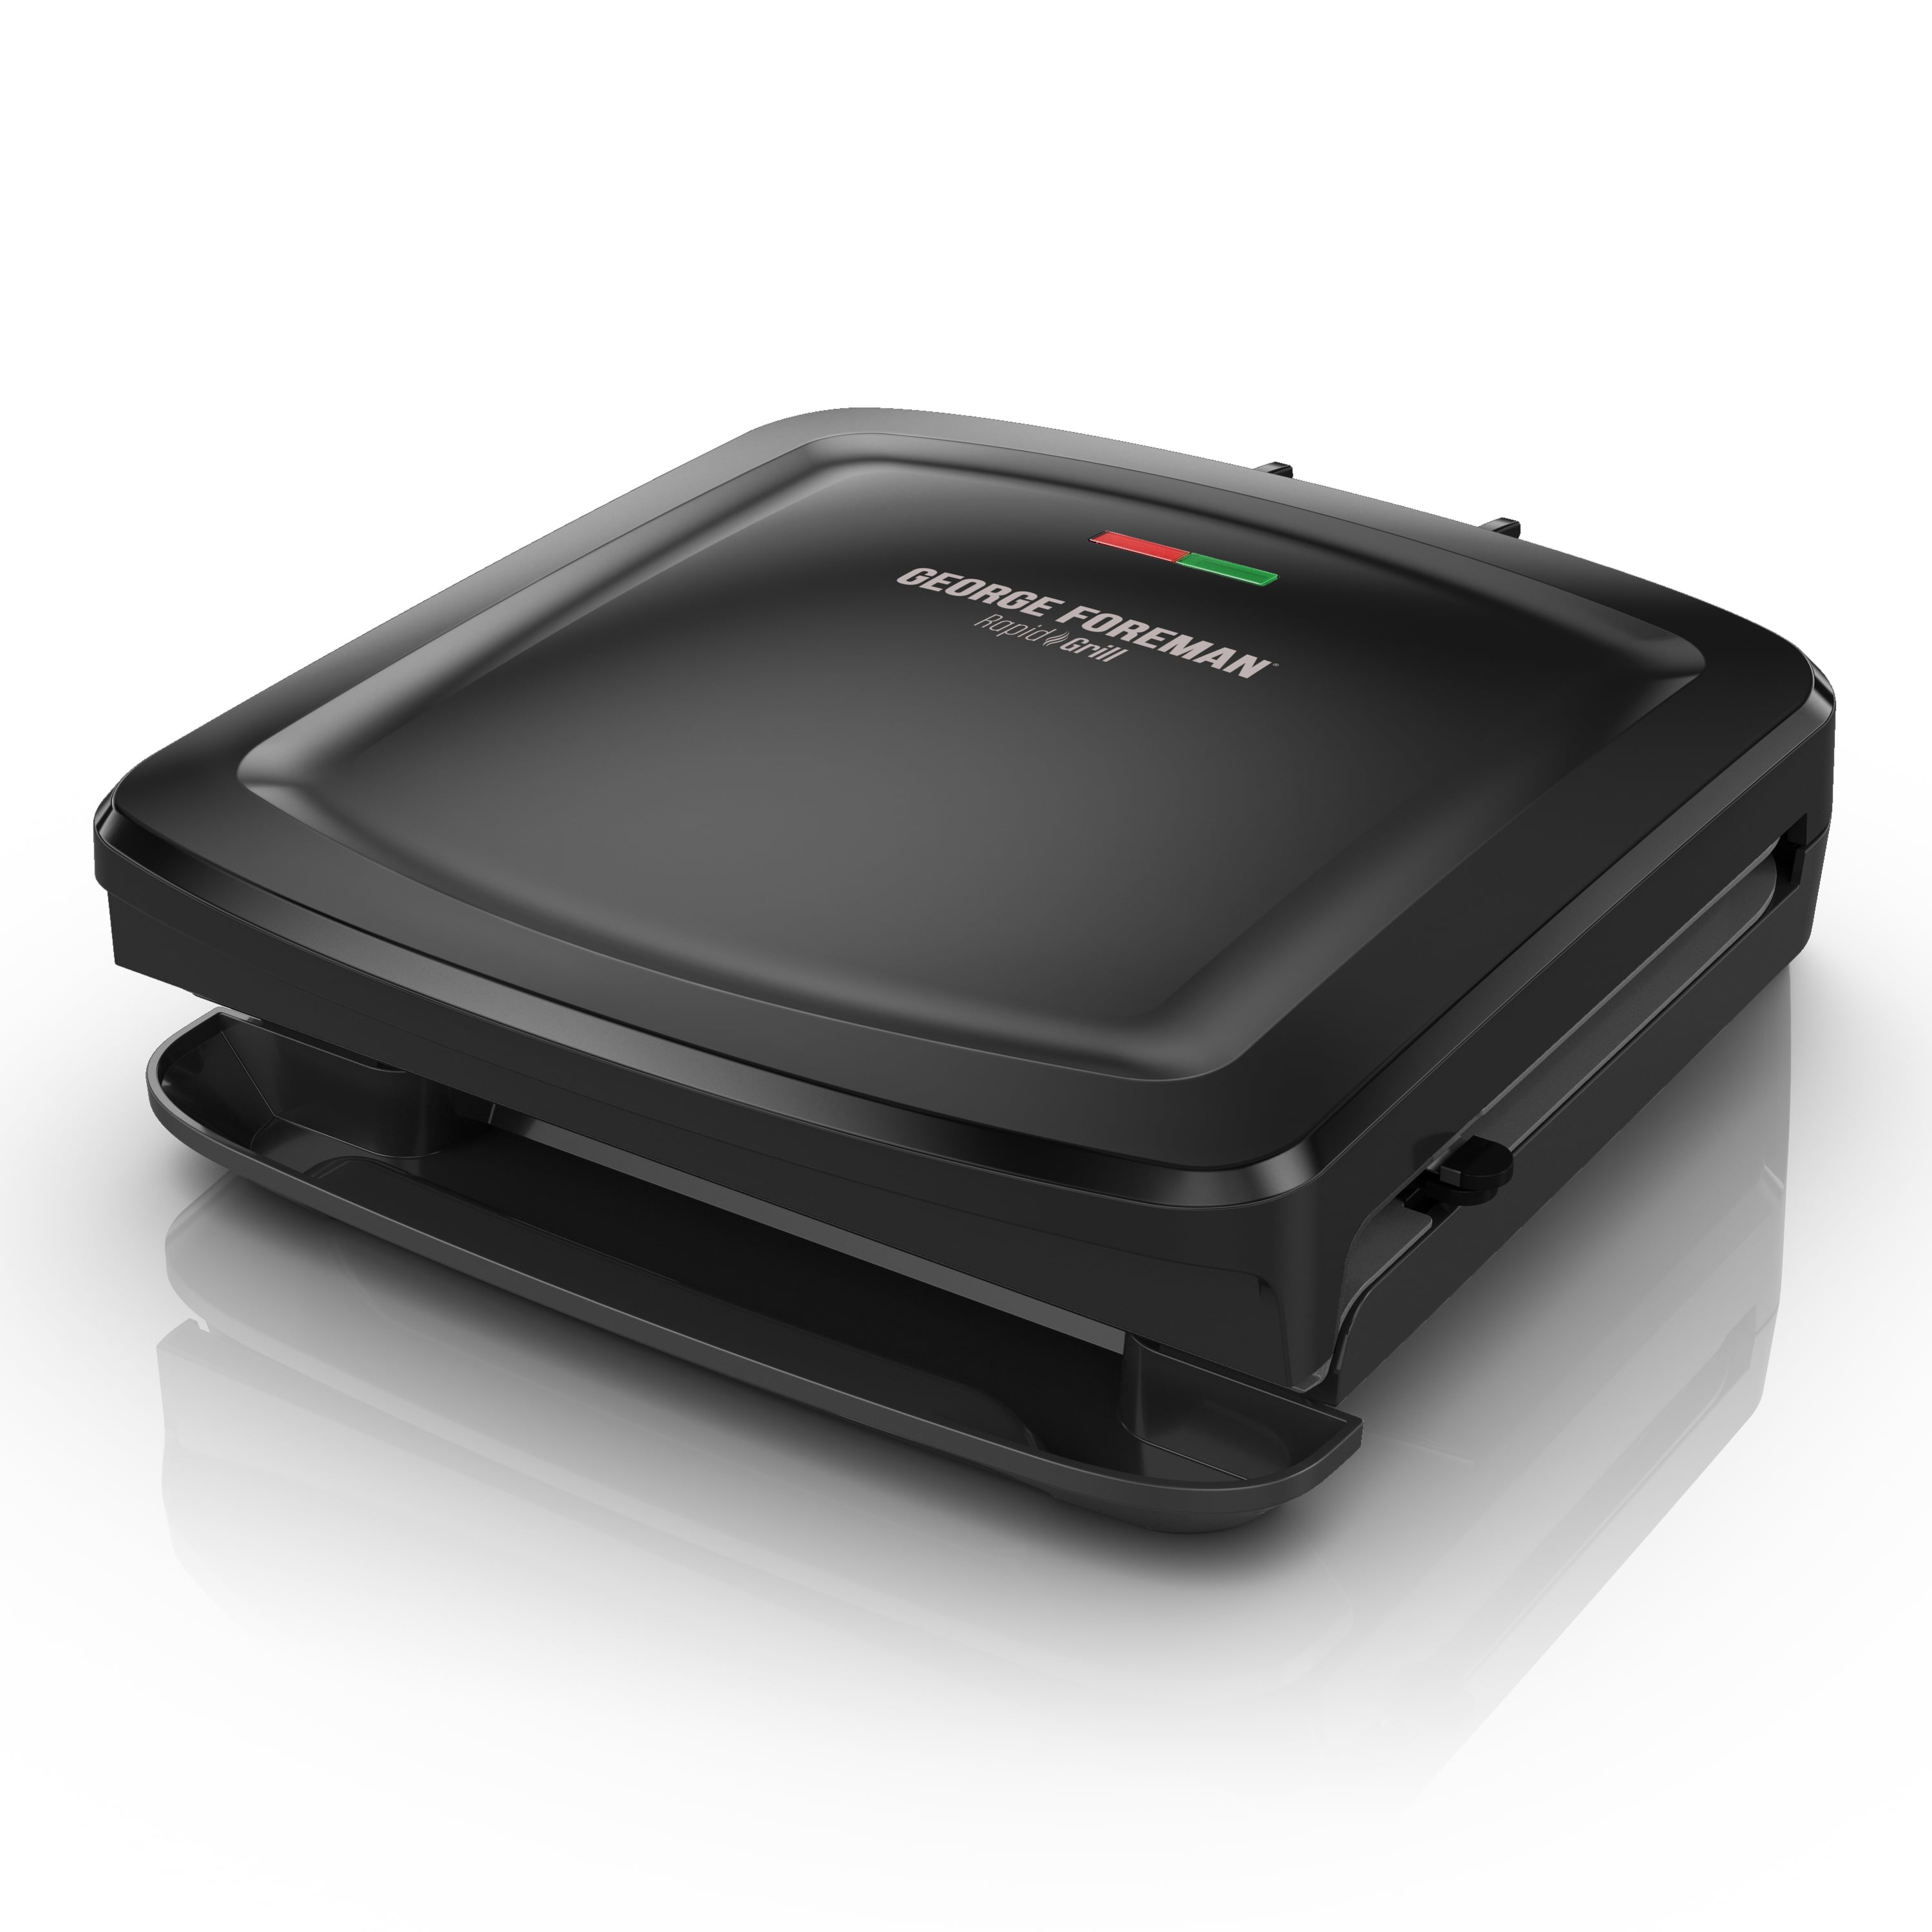 Buy George Foreman GRP0004B Plate and Panini Grill, 6 in W Cooking Surface,  12 in D Cooking Surface, 1000 W, 120 V, Black Black